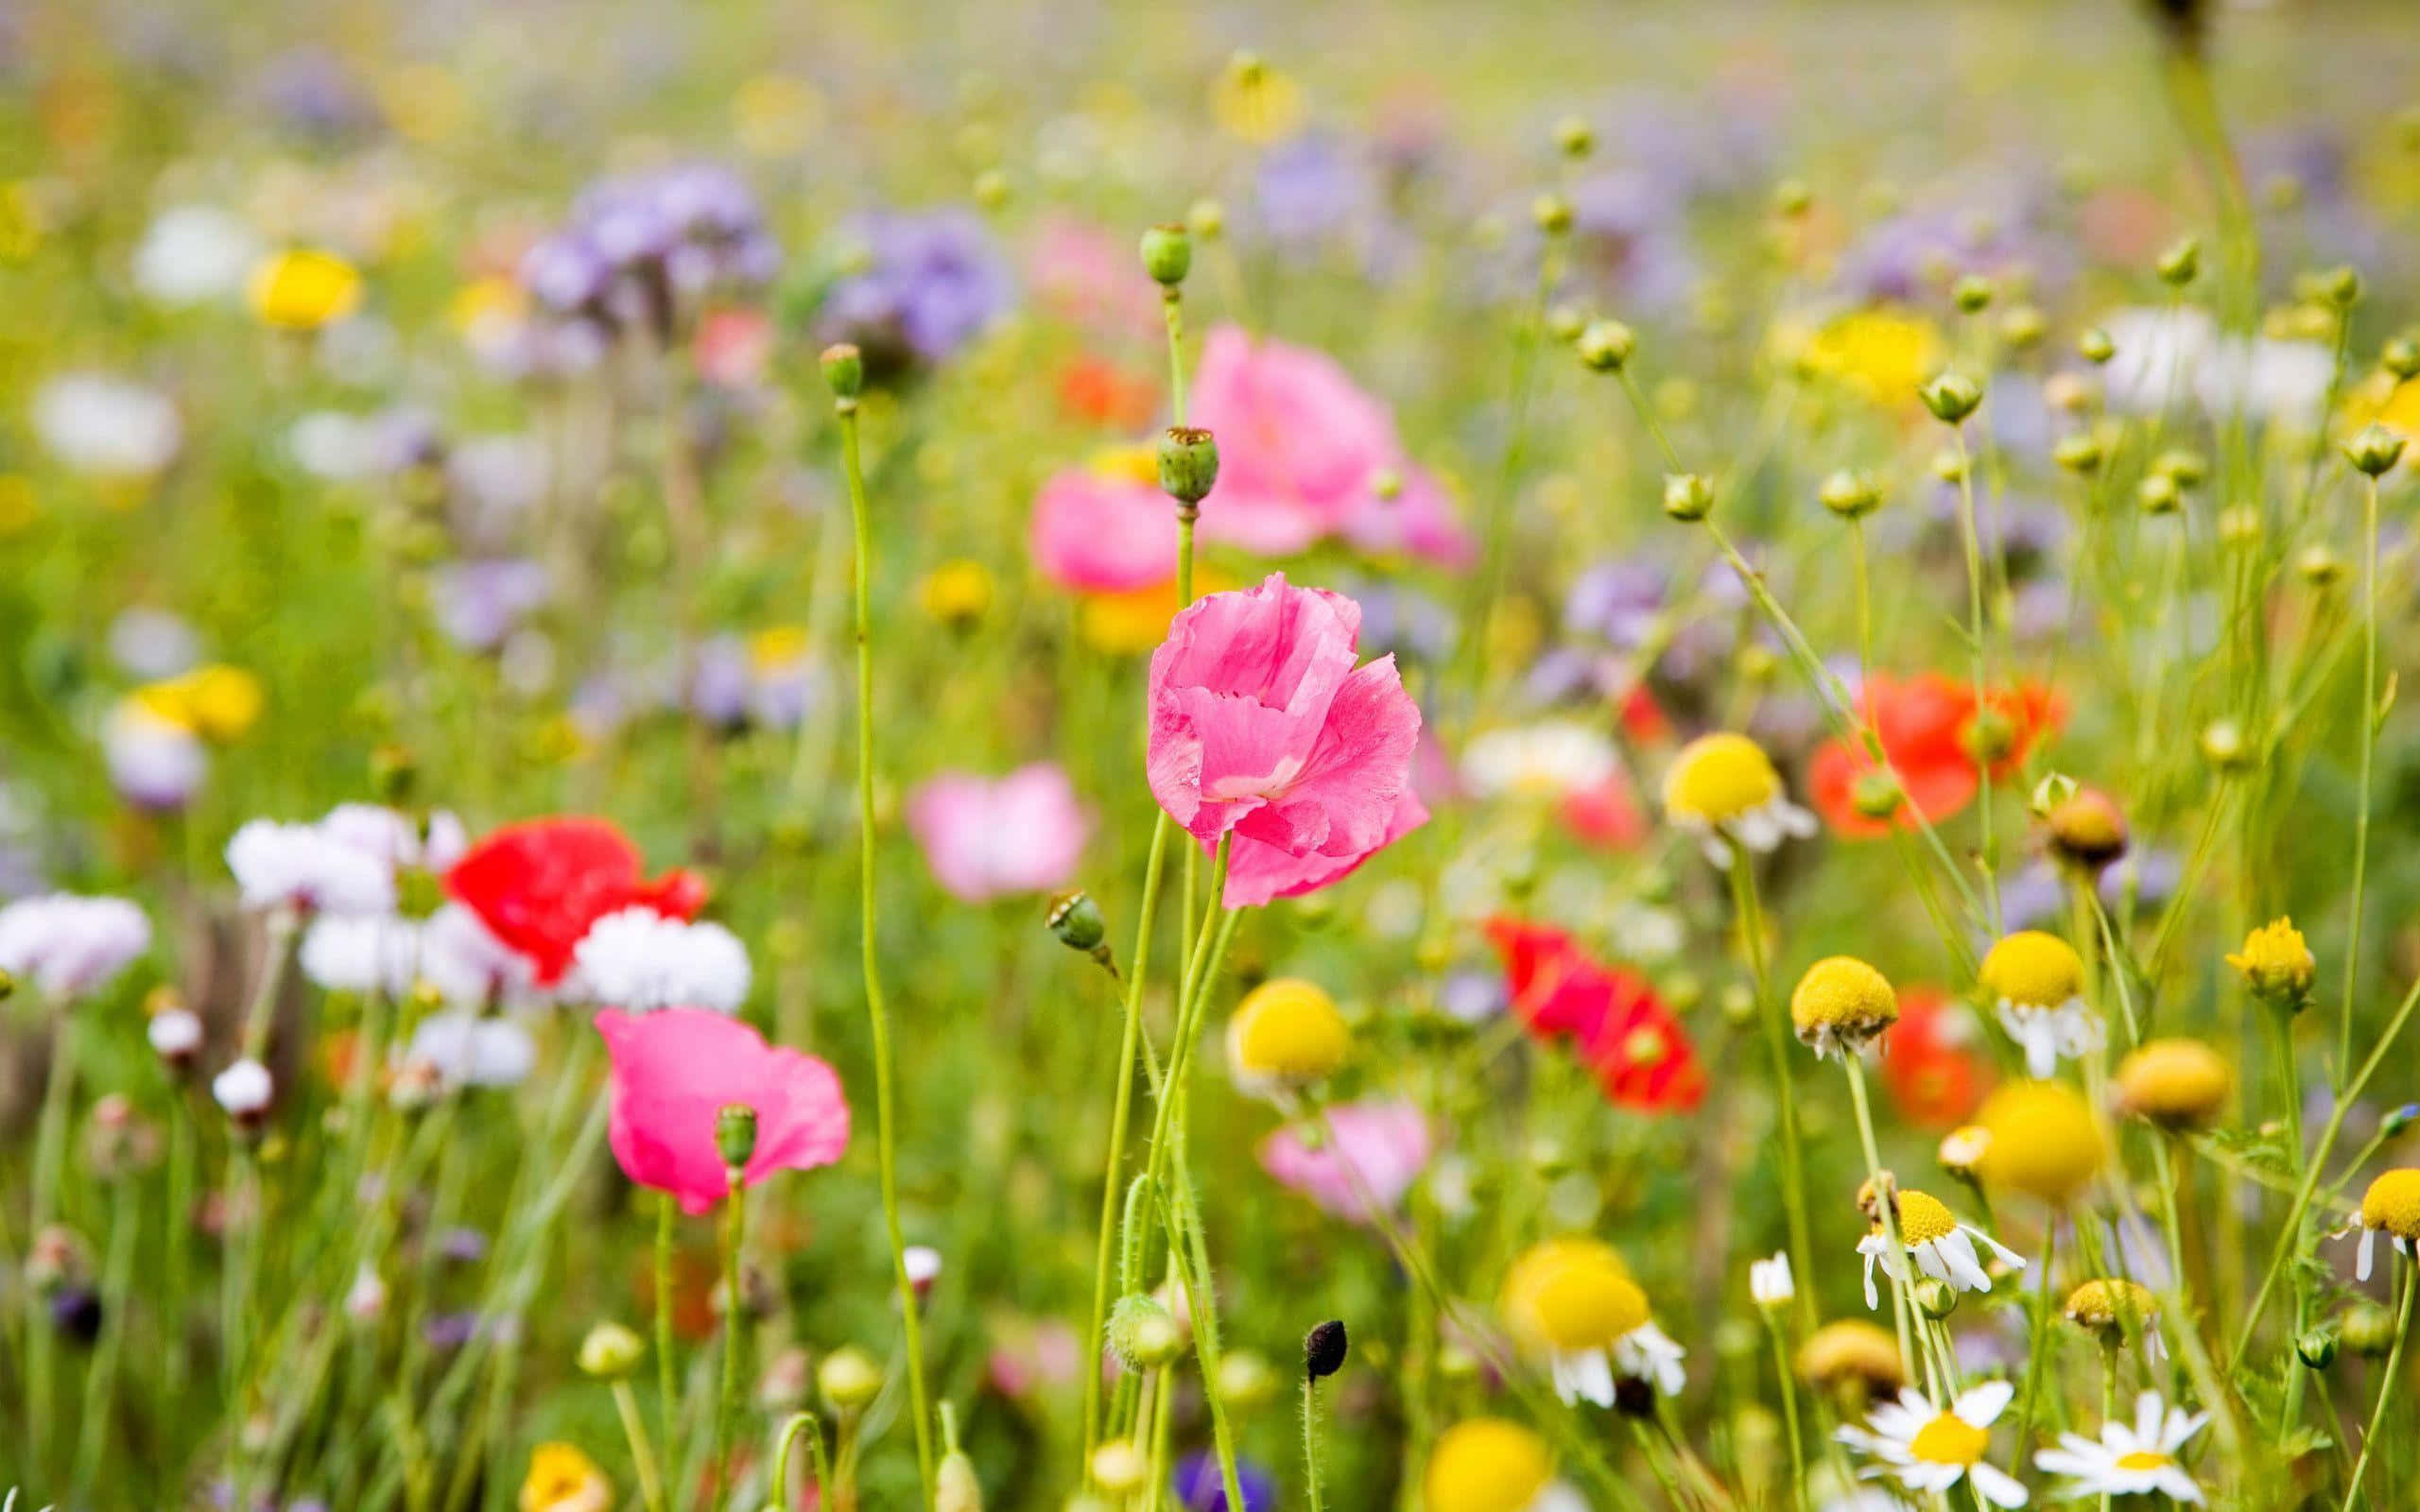 Bright Day In A Blooming Flower Field Wallpaper